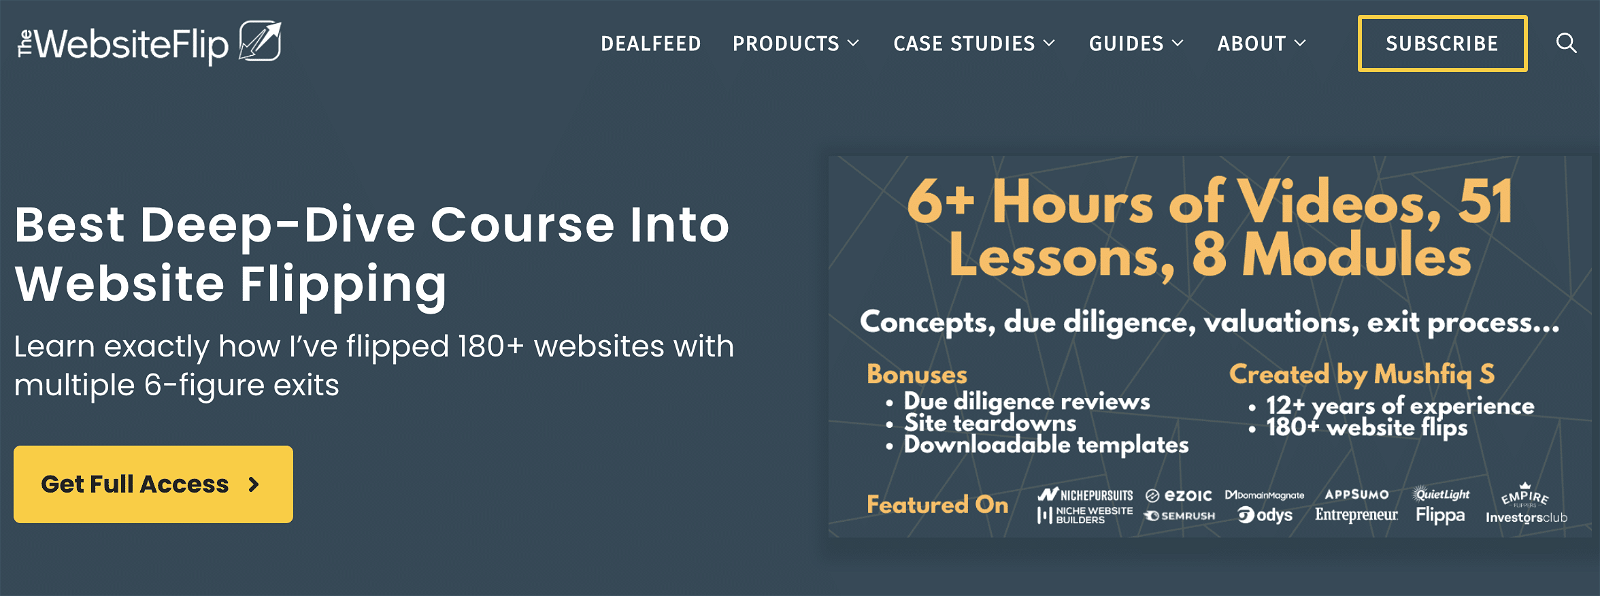 The WebsiteFlip Website Flipping Course Review